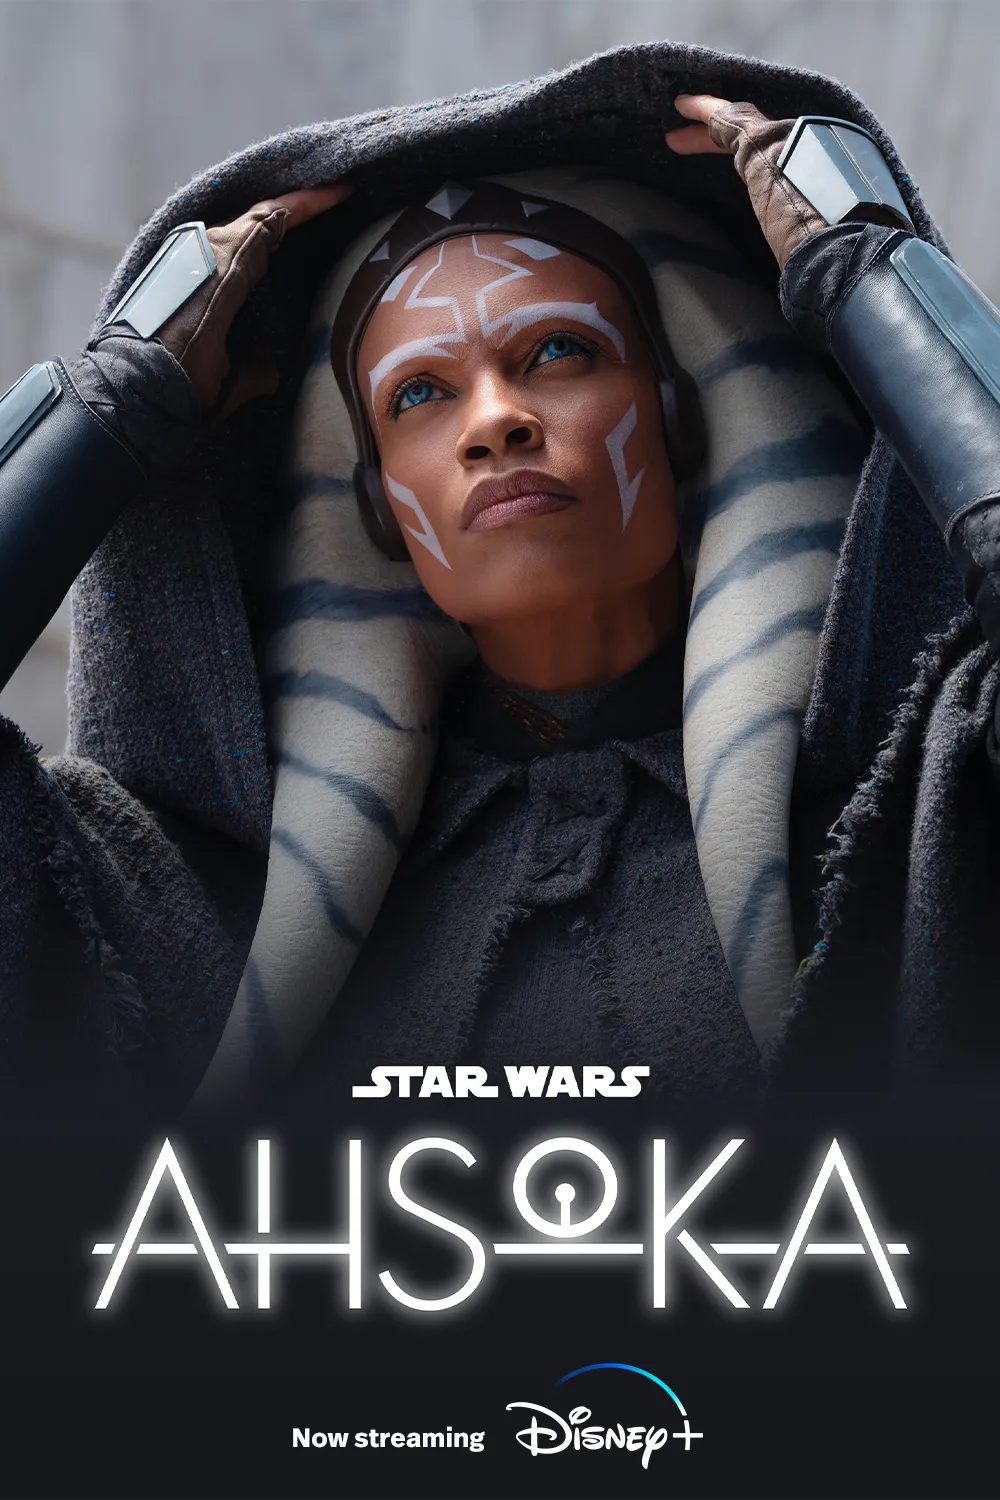 Star Wars: Ahsoka on Disney+ TV show poster: The fan-favorite character returns in her own live-action series, following her journey after the events of Star Wars: The Clone Wars and Star Wars Rebels.